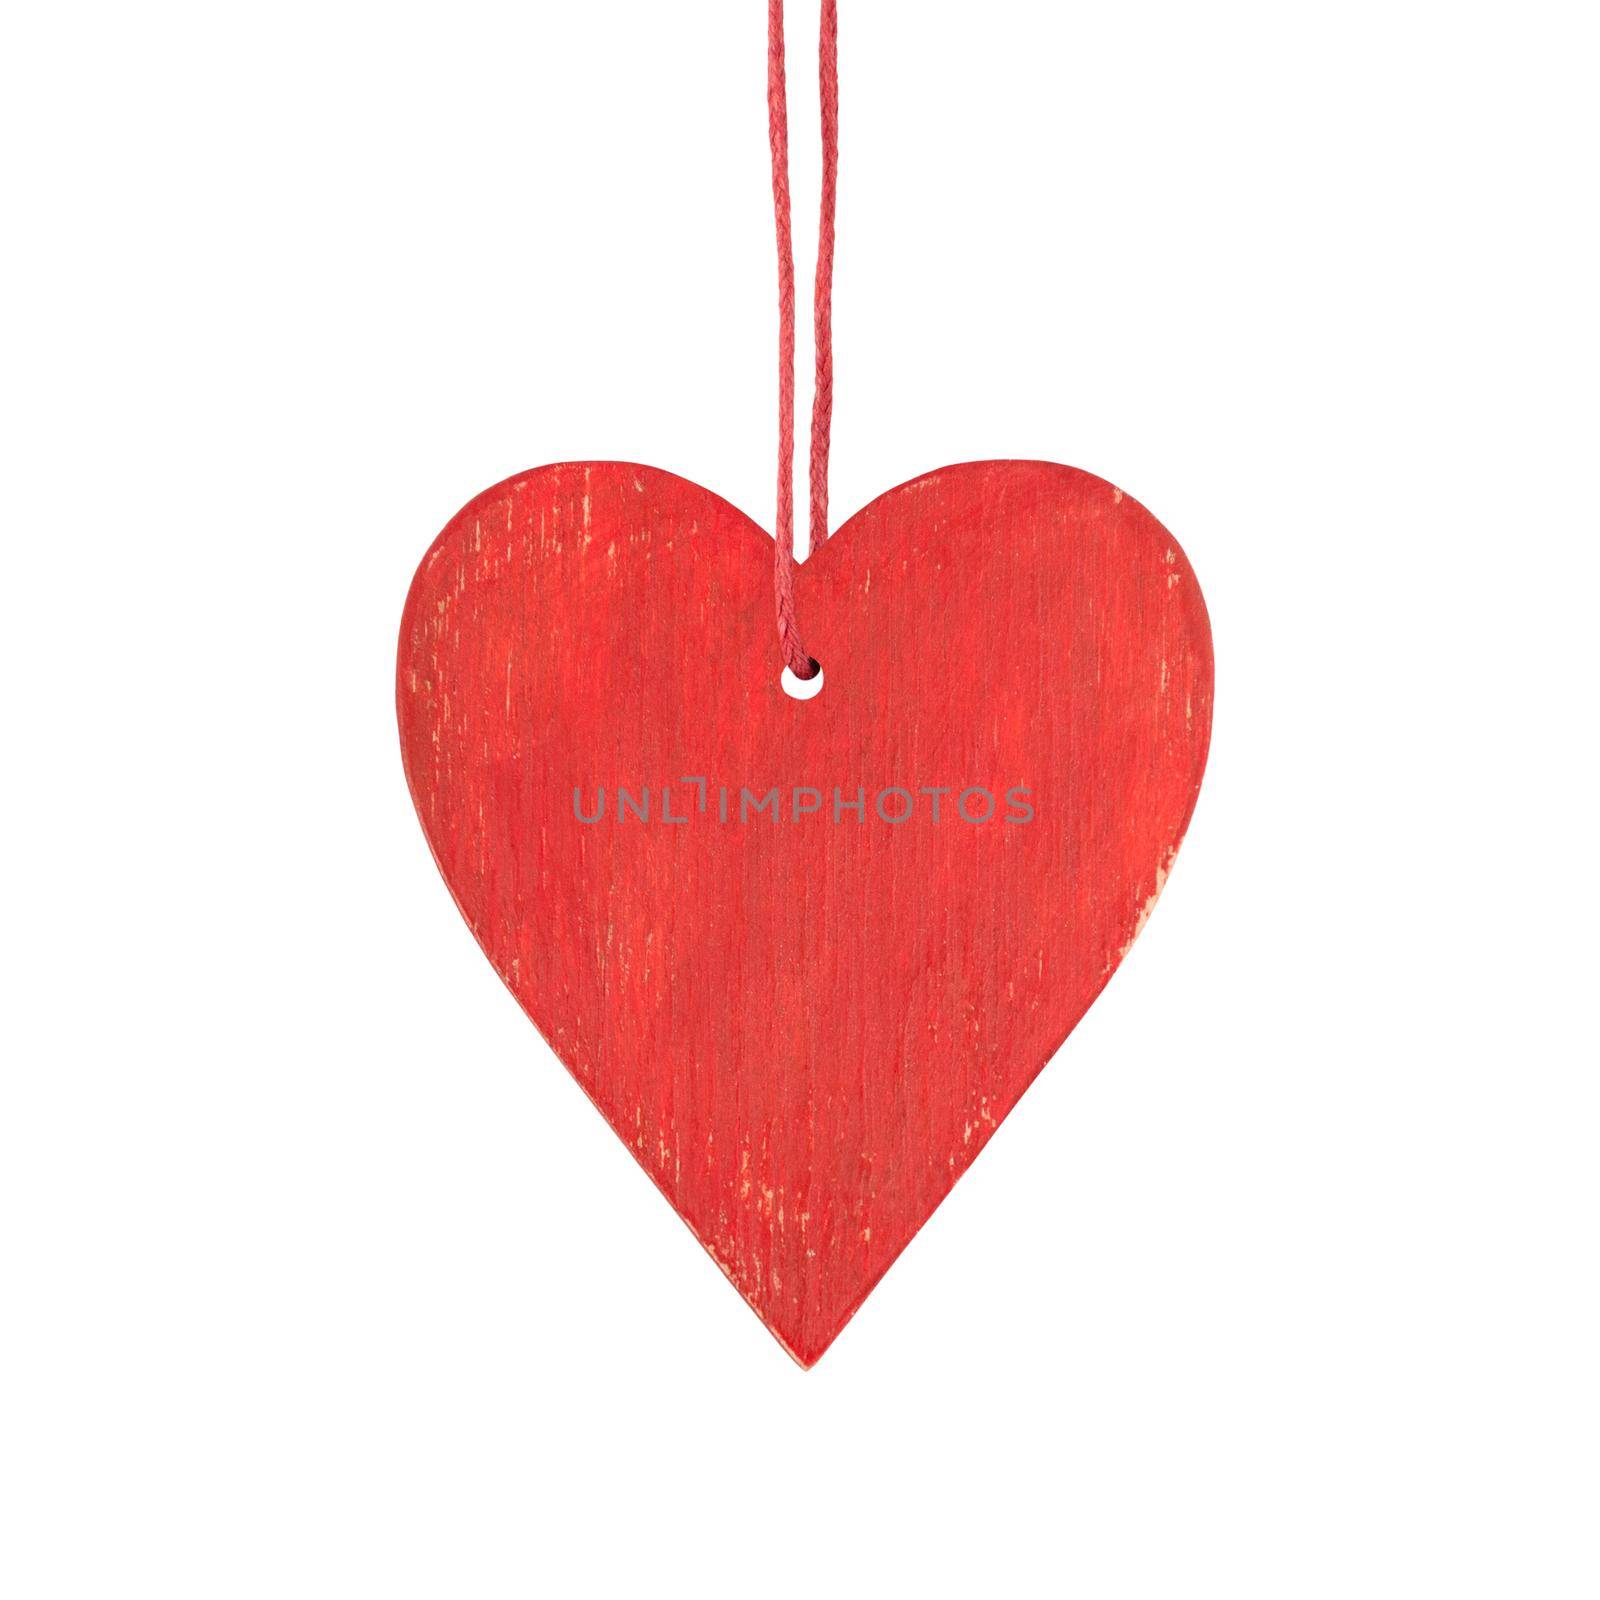 Hanging red wooden heart. Christmas ornament isolated on white background.